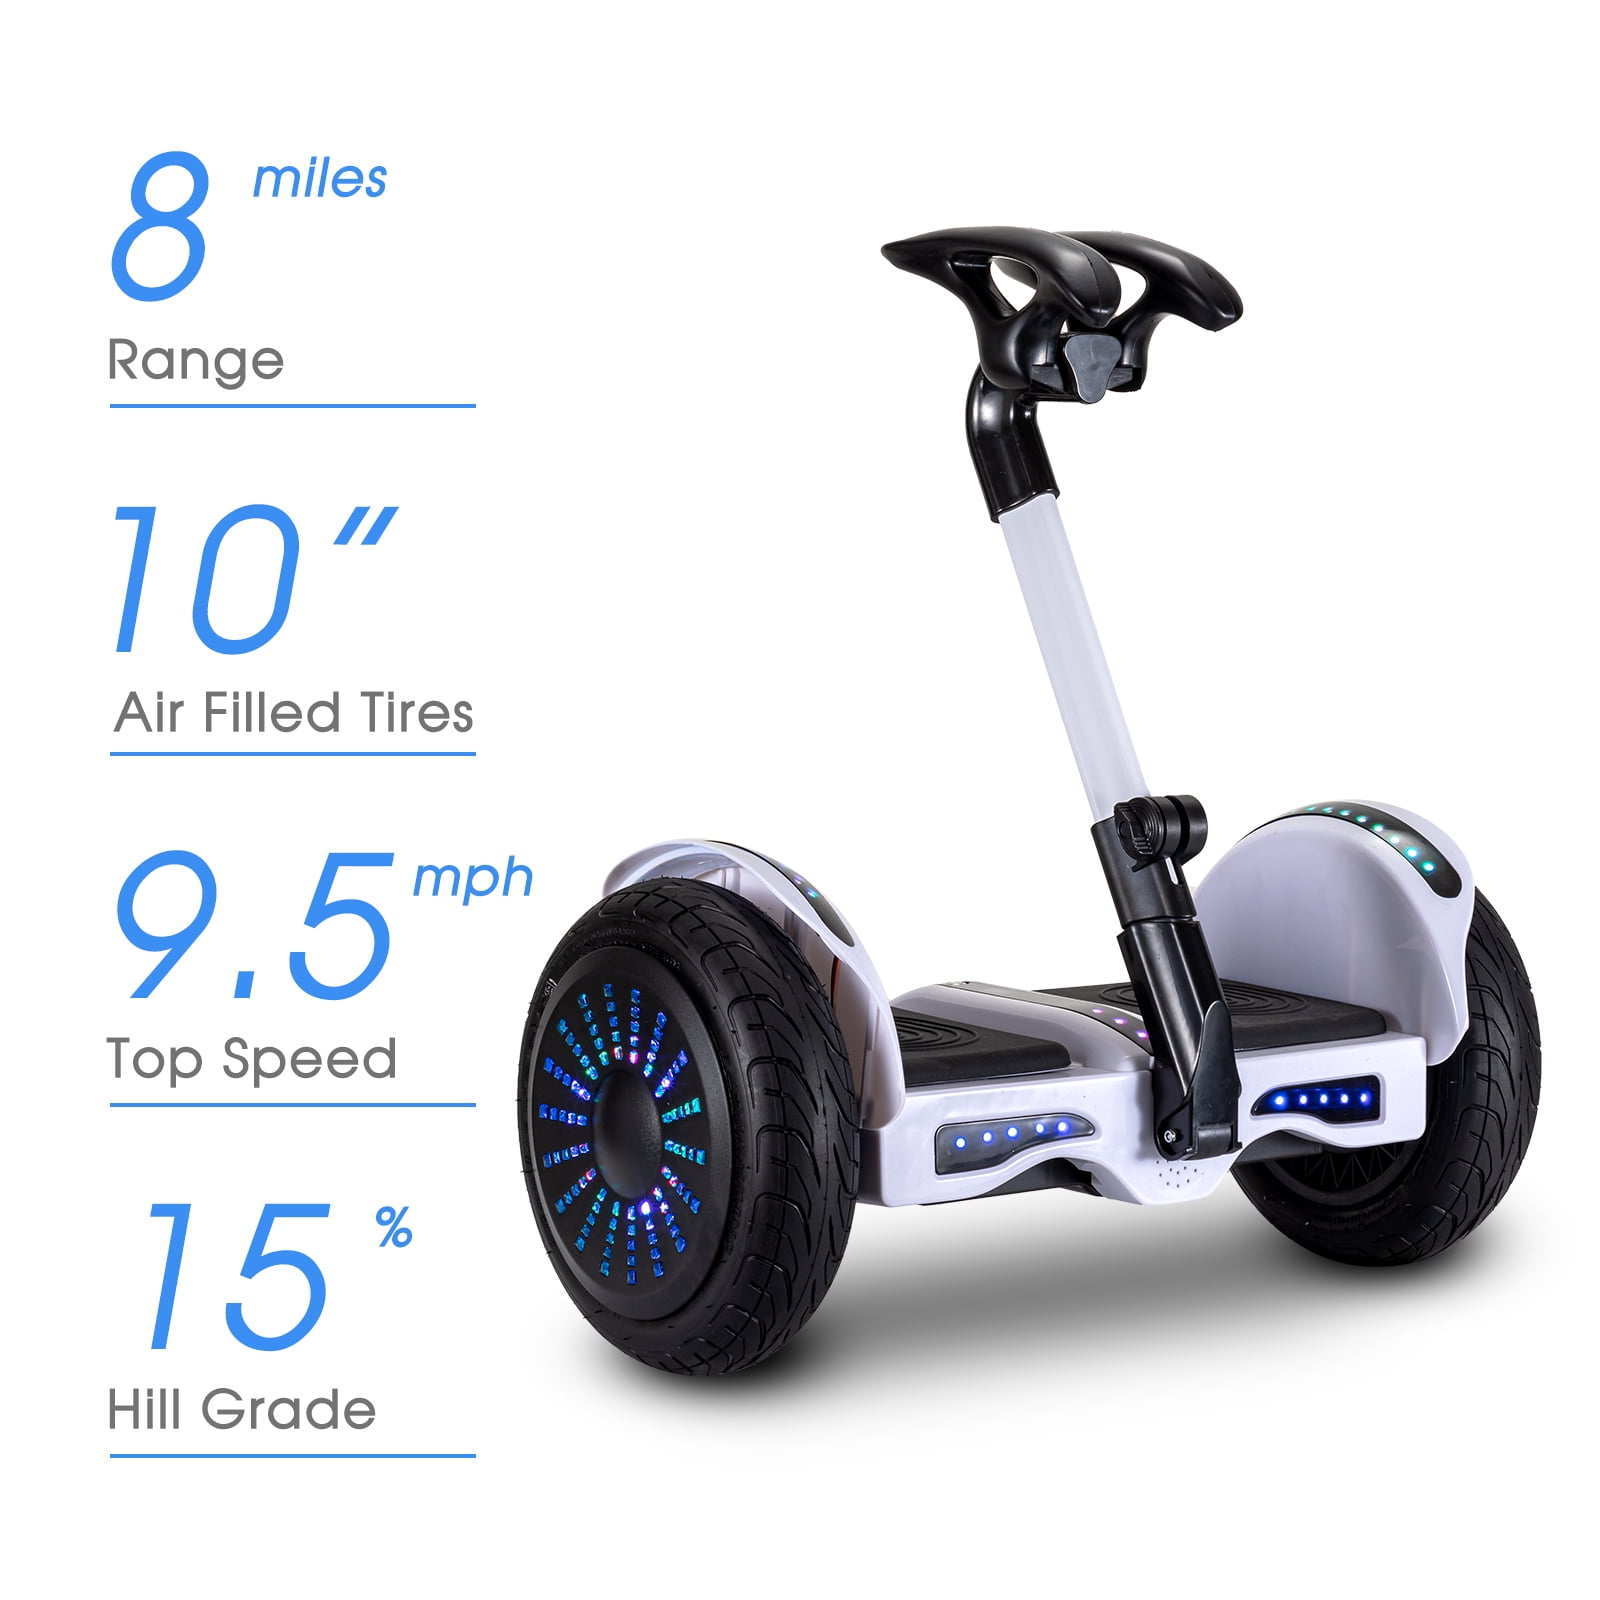 Intelligent Self-Balancing Electric Scooter, 10" Tires, Bluetooth app management, Safer and easier ride, good for teens adults, - Walmart.com